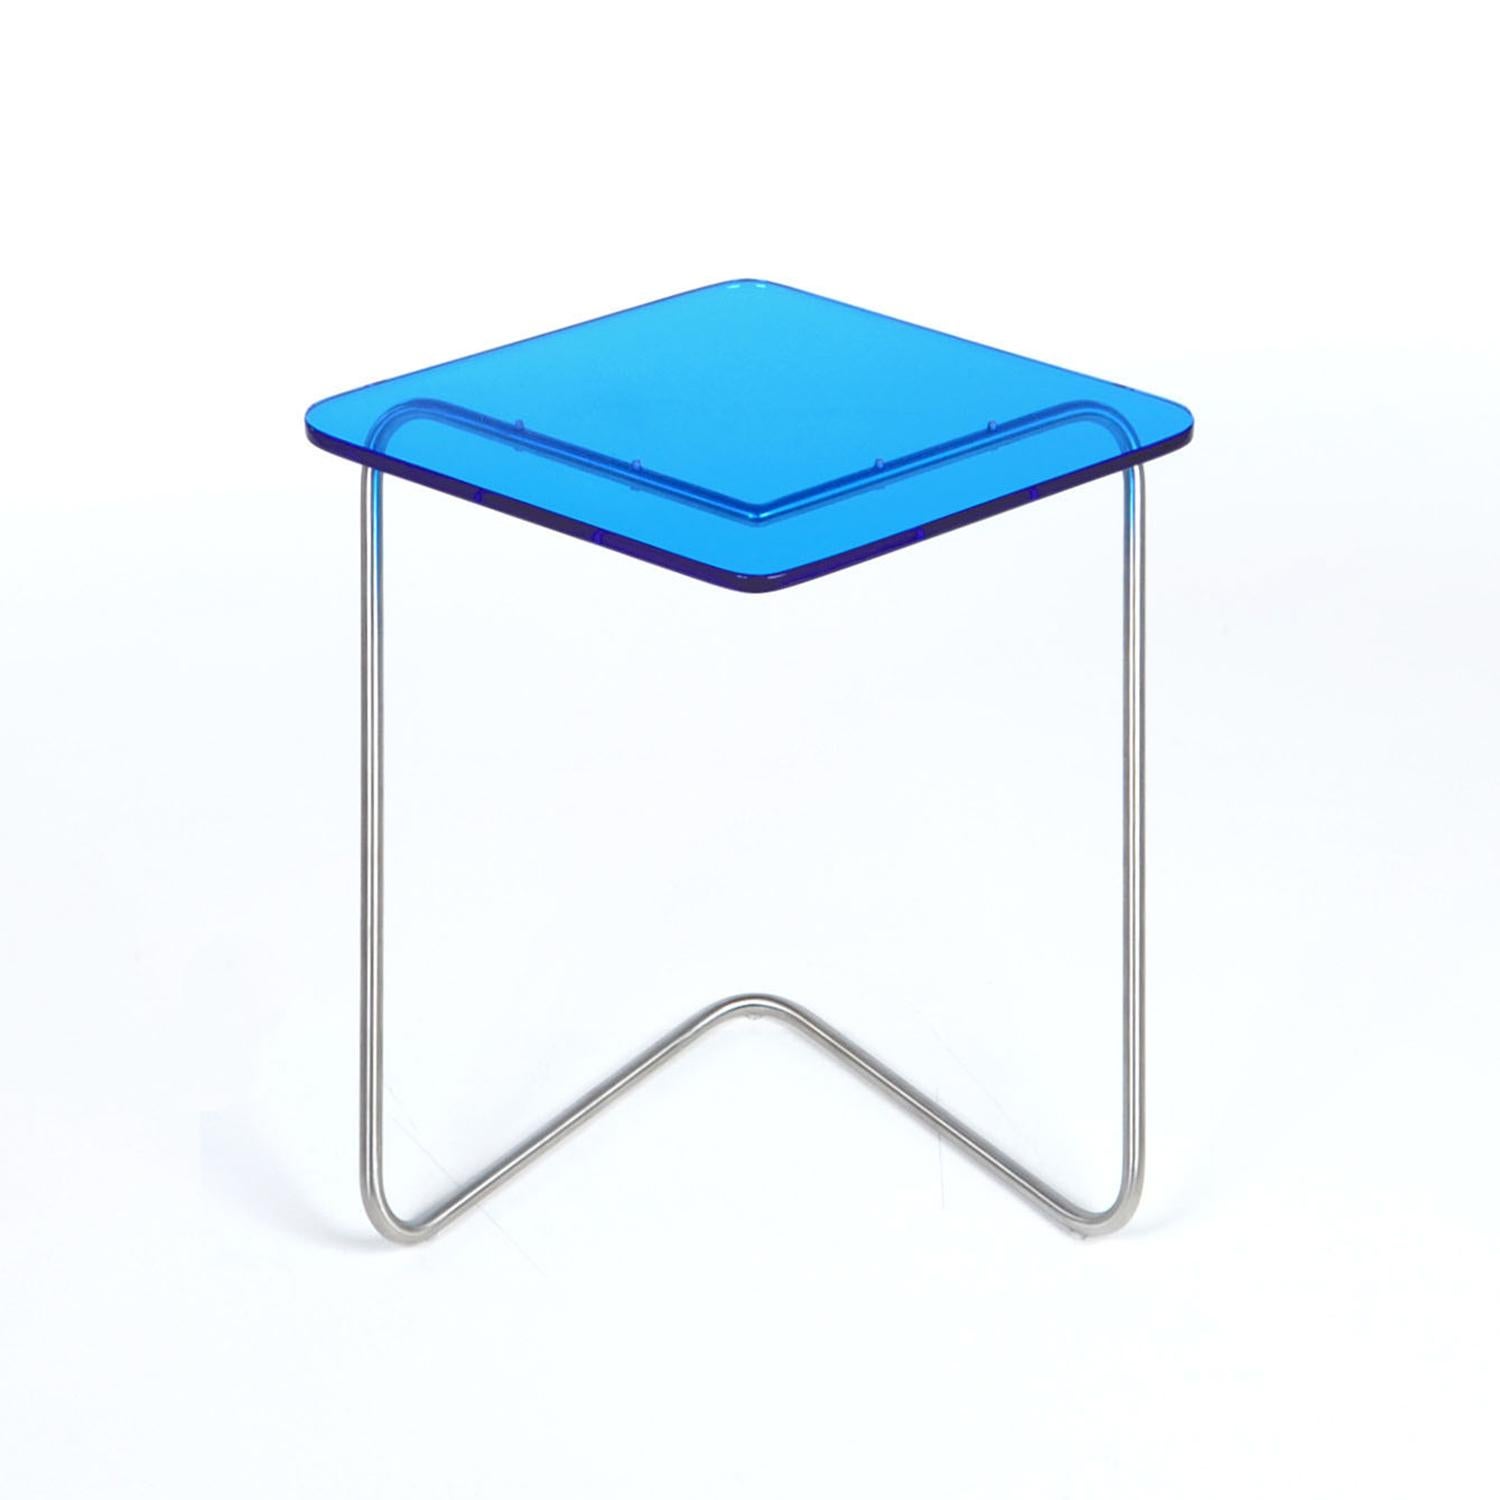 The Diamond side table by Rita Kettaneh 
Dimensions: The base: brushed stainless steel 
 optionally plated with copper or brass
 The top: acrylic
Materials: H 42 x W 45 x D 34.5 cm
Weight: 2.65 Kg

Colors and Finishes: 
Stainless finish: